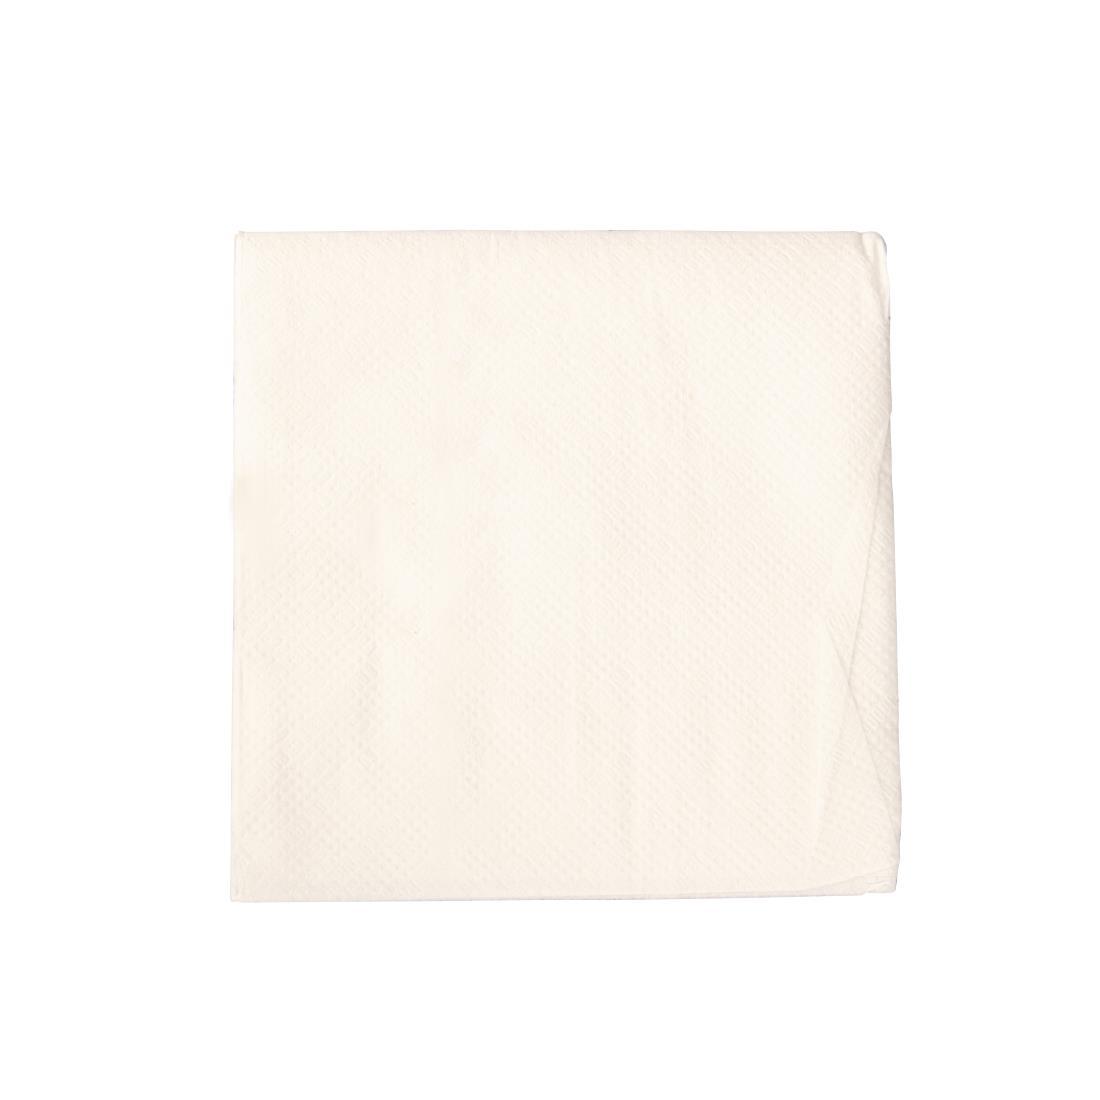 Fiesta Recyclable Cocktail Napkin White 24x24cm 1ply 1/4 Fold (Pack of 250) - CM561  - 2